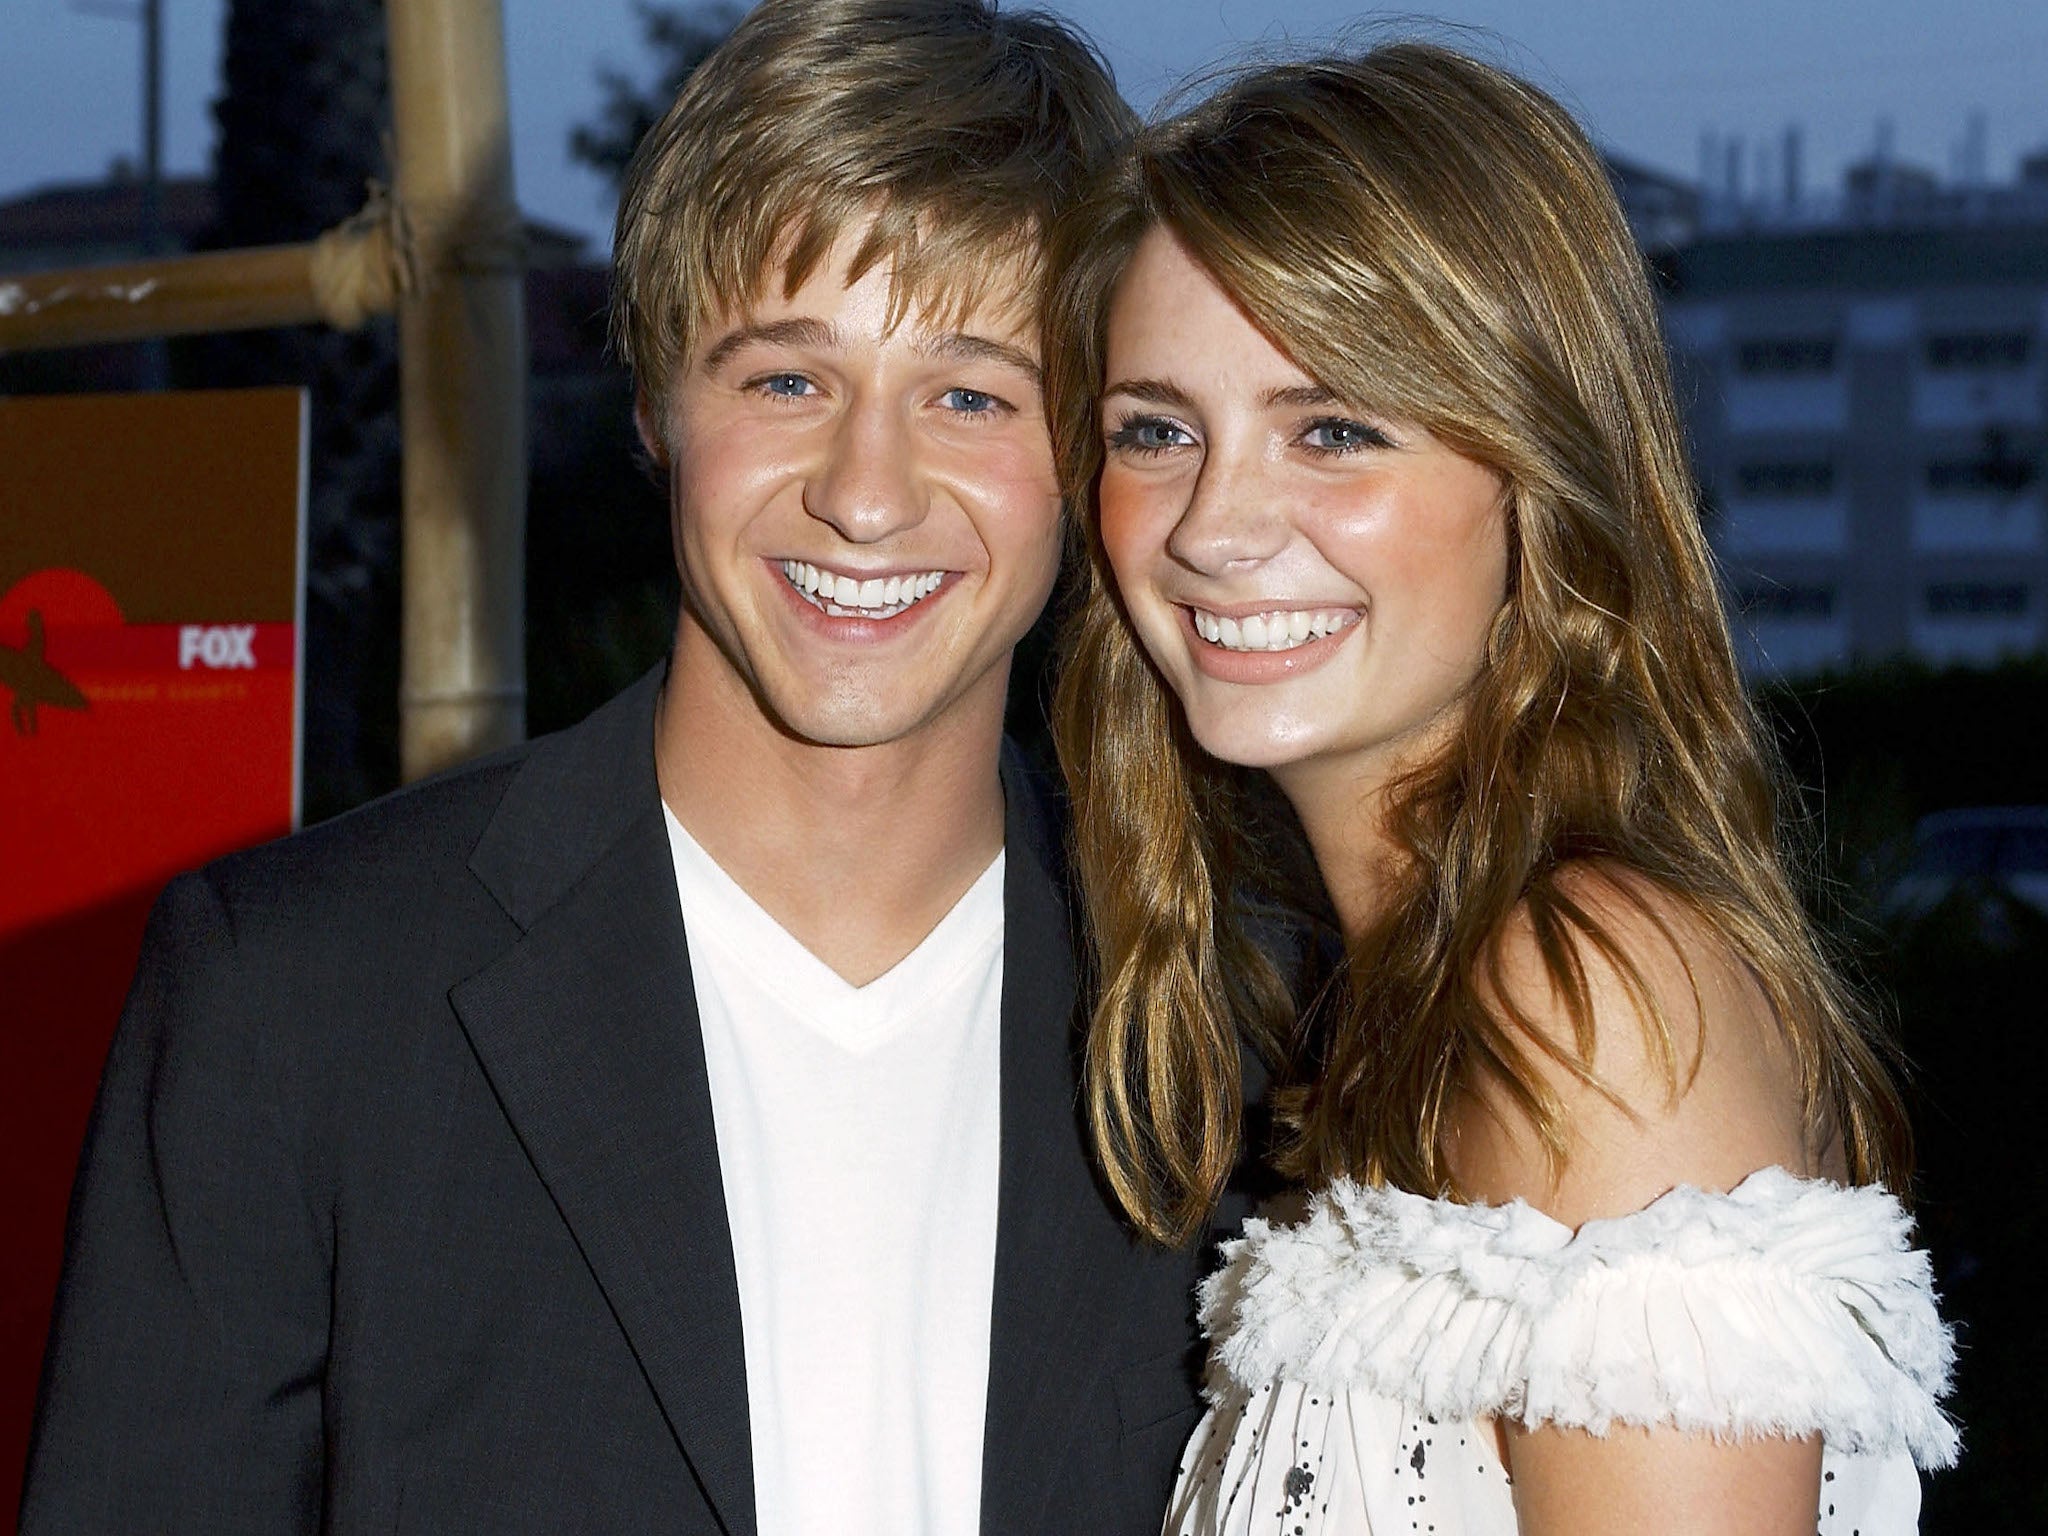 Ben McKenzie and Mischa Barton, pictured in 2003, starred in the popular drama The O.C.